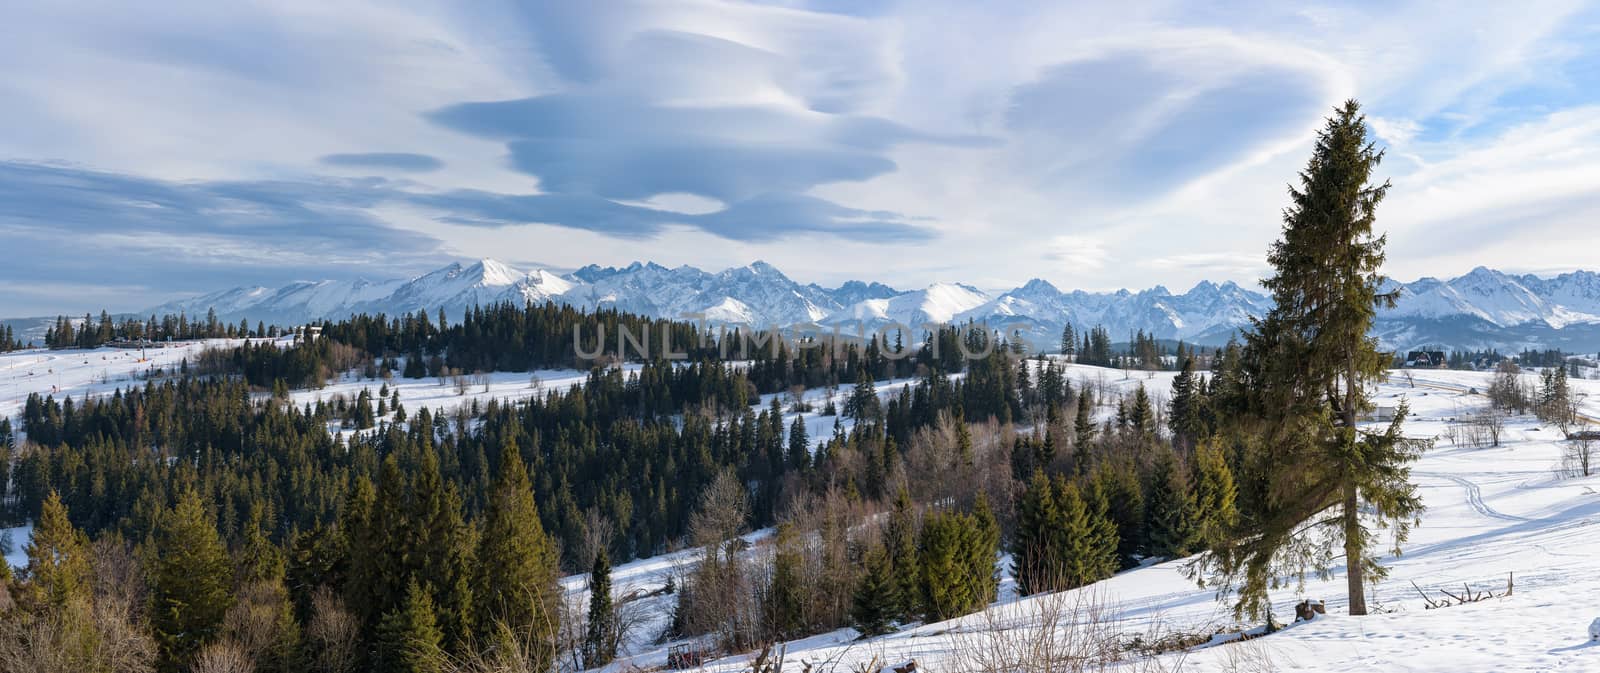 Panoramic winter landscape of High Tatra Mountains by mkos83